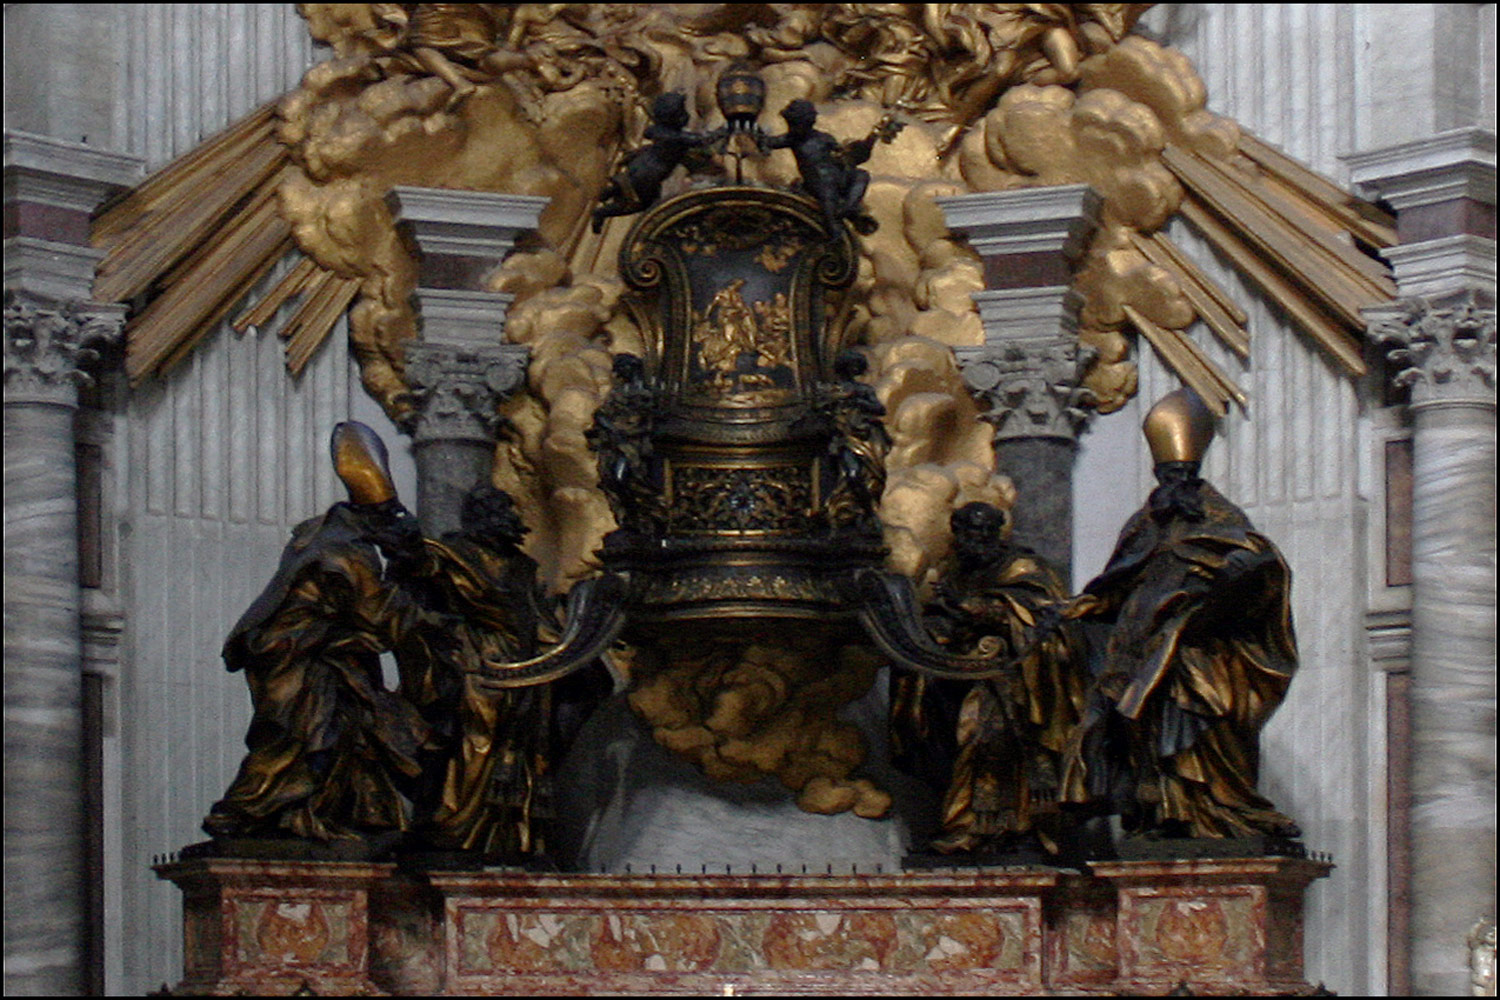 The Main and Floor of the Papal Basilica of Saint Peter | Steve's Genealogy Blog